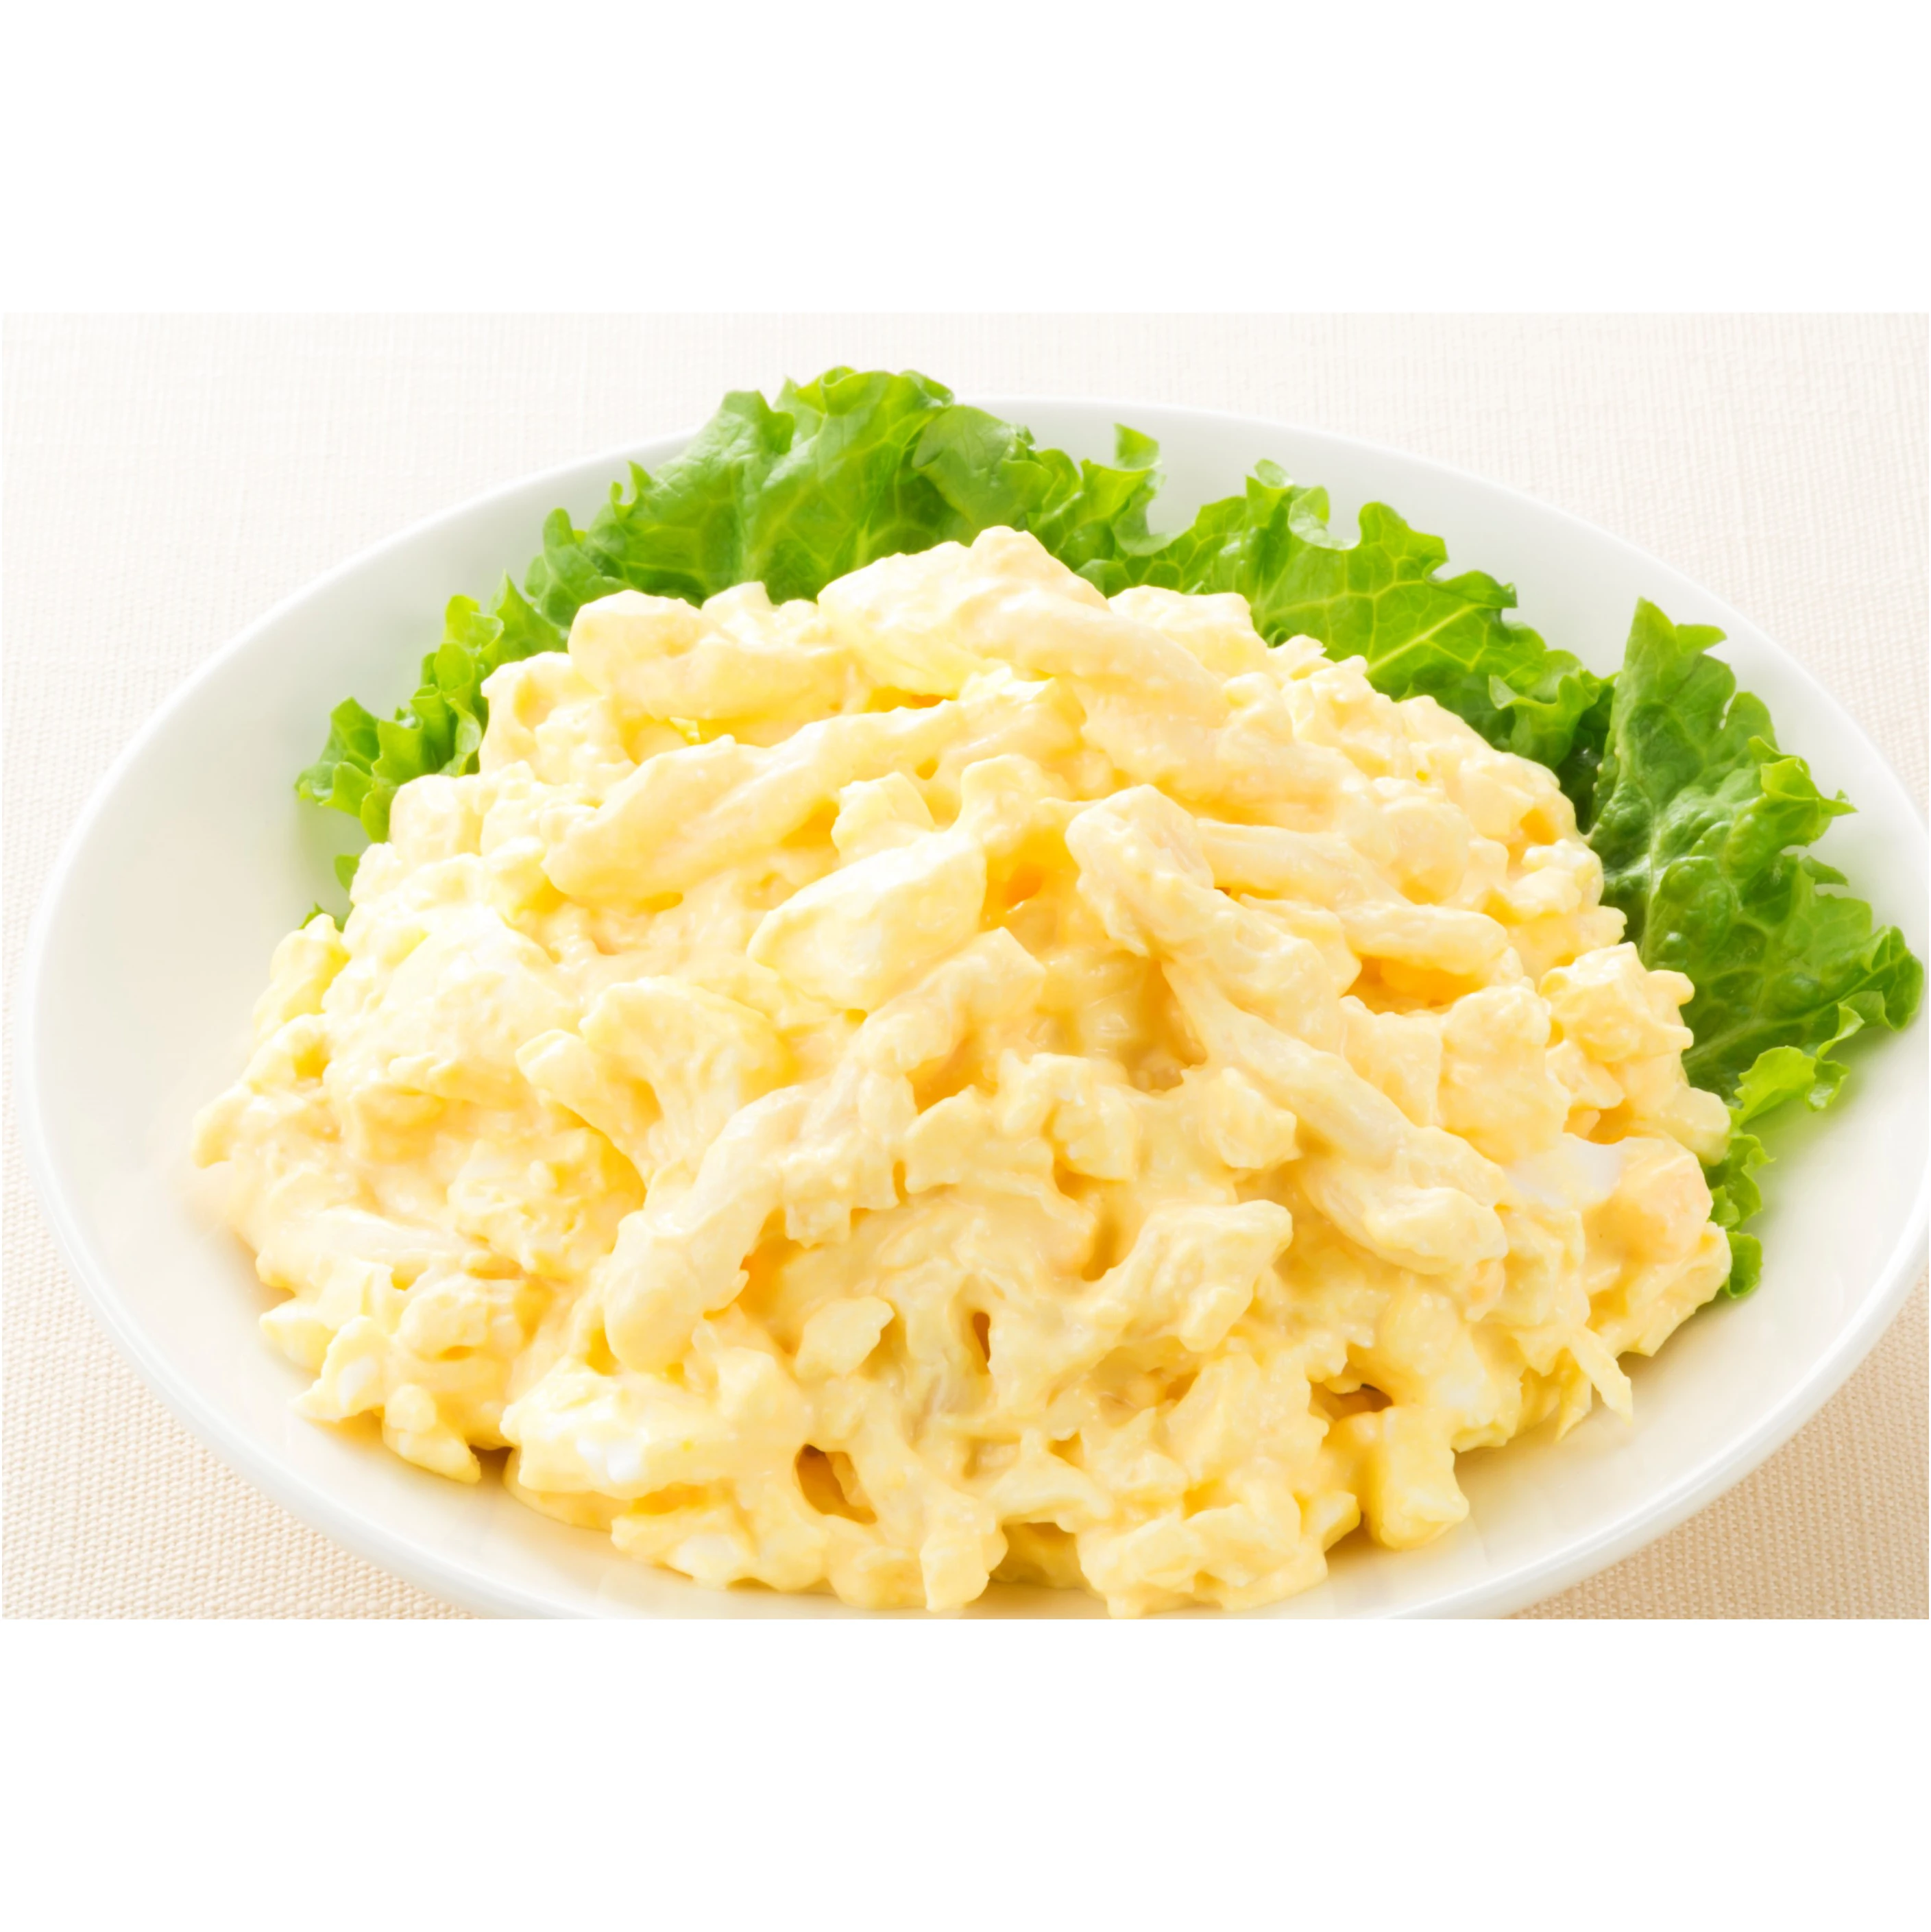 High reputation hearty and the texture poultry egg product wholesale